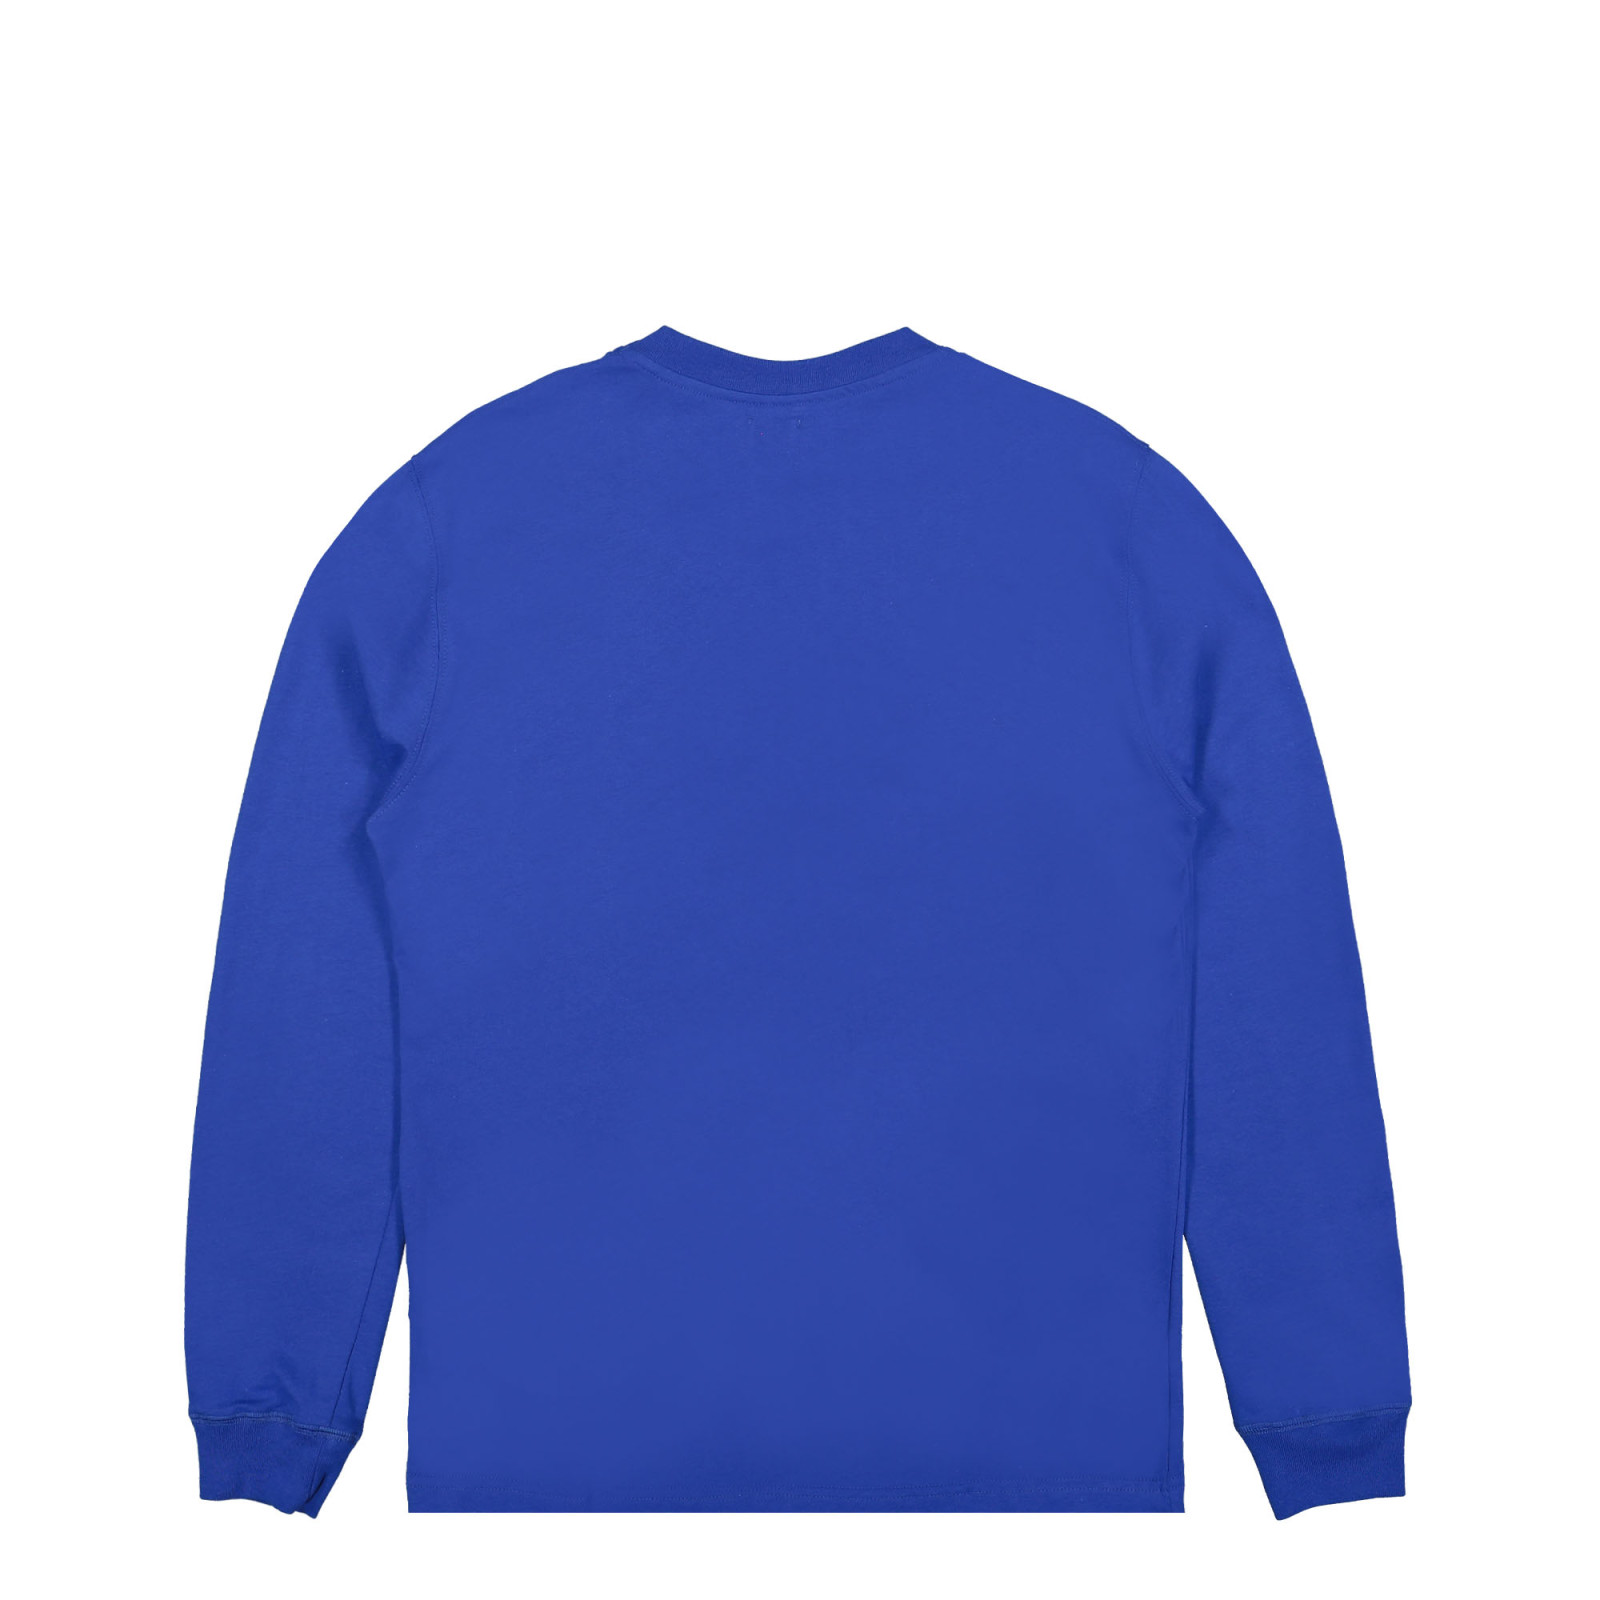 New Balance Made In USA
Core LS Tee
Blue